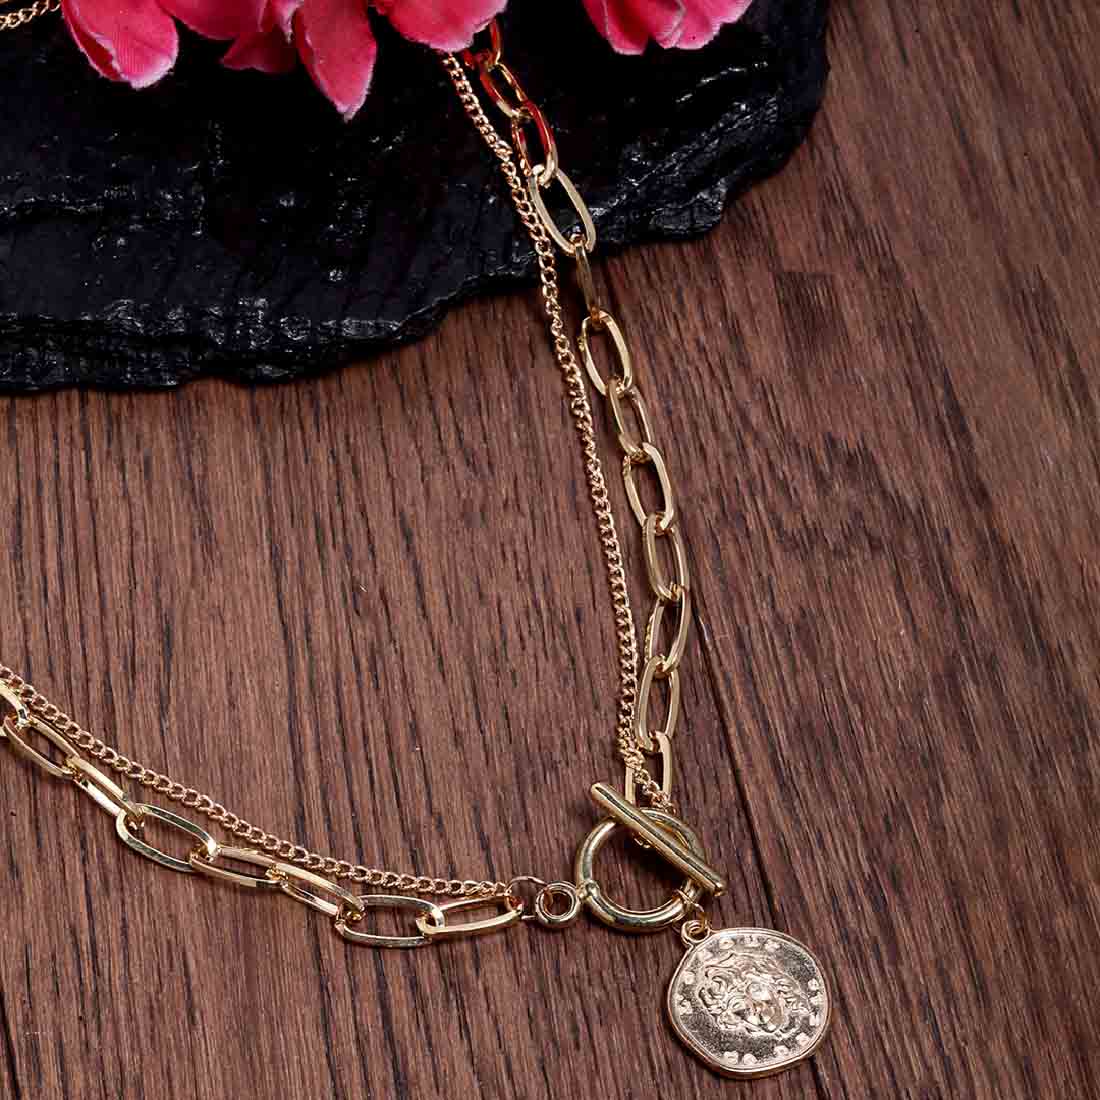 Presley Golden Coin Charm Necklace